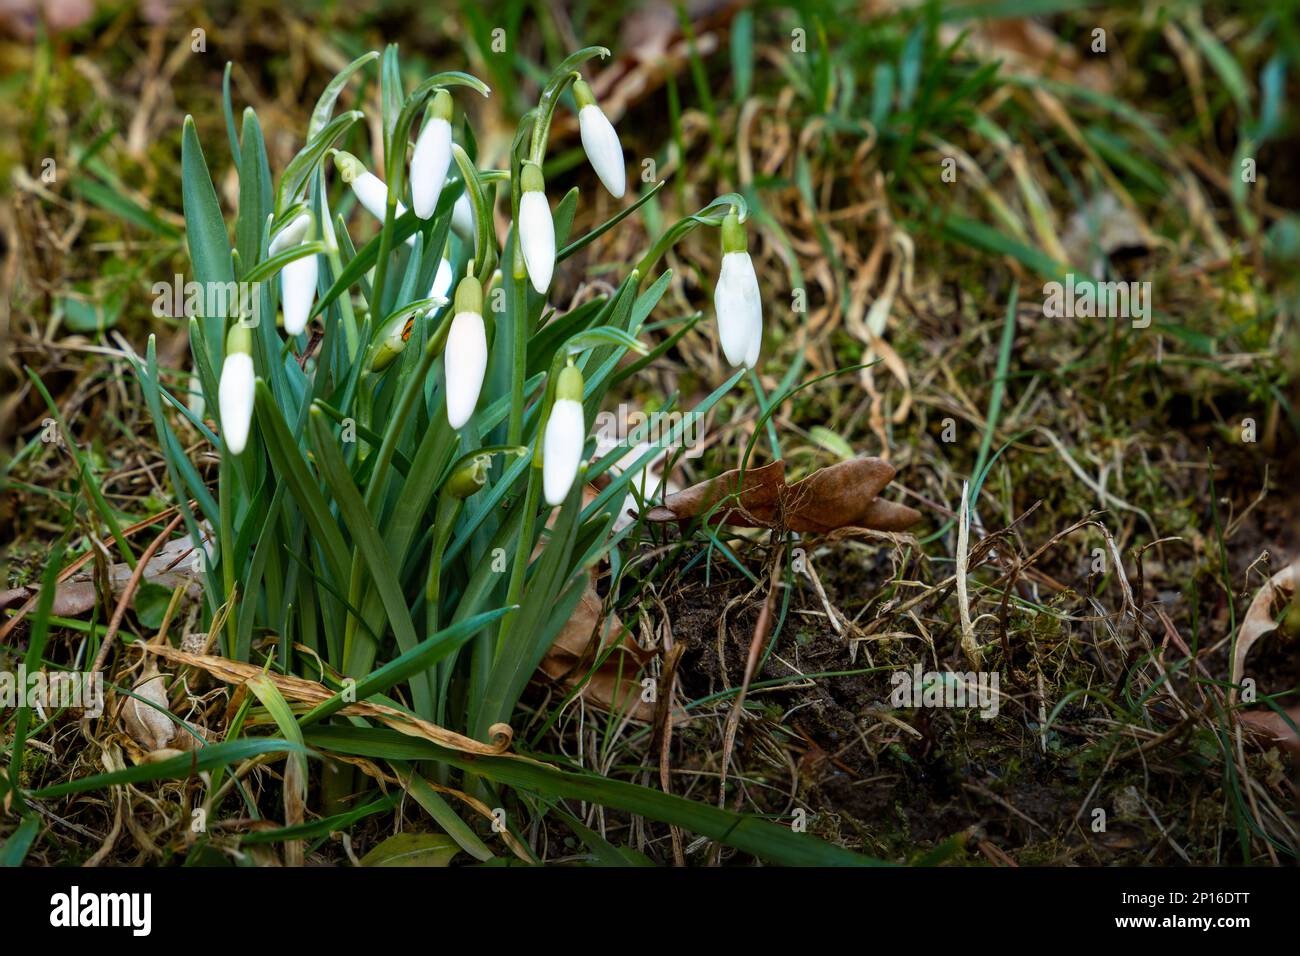 First spring flowers - snowdrops in forest. Stock Photo